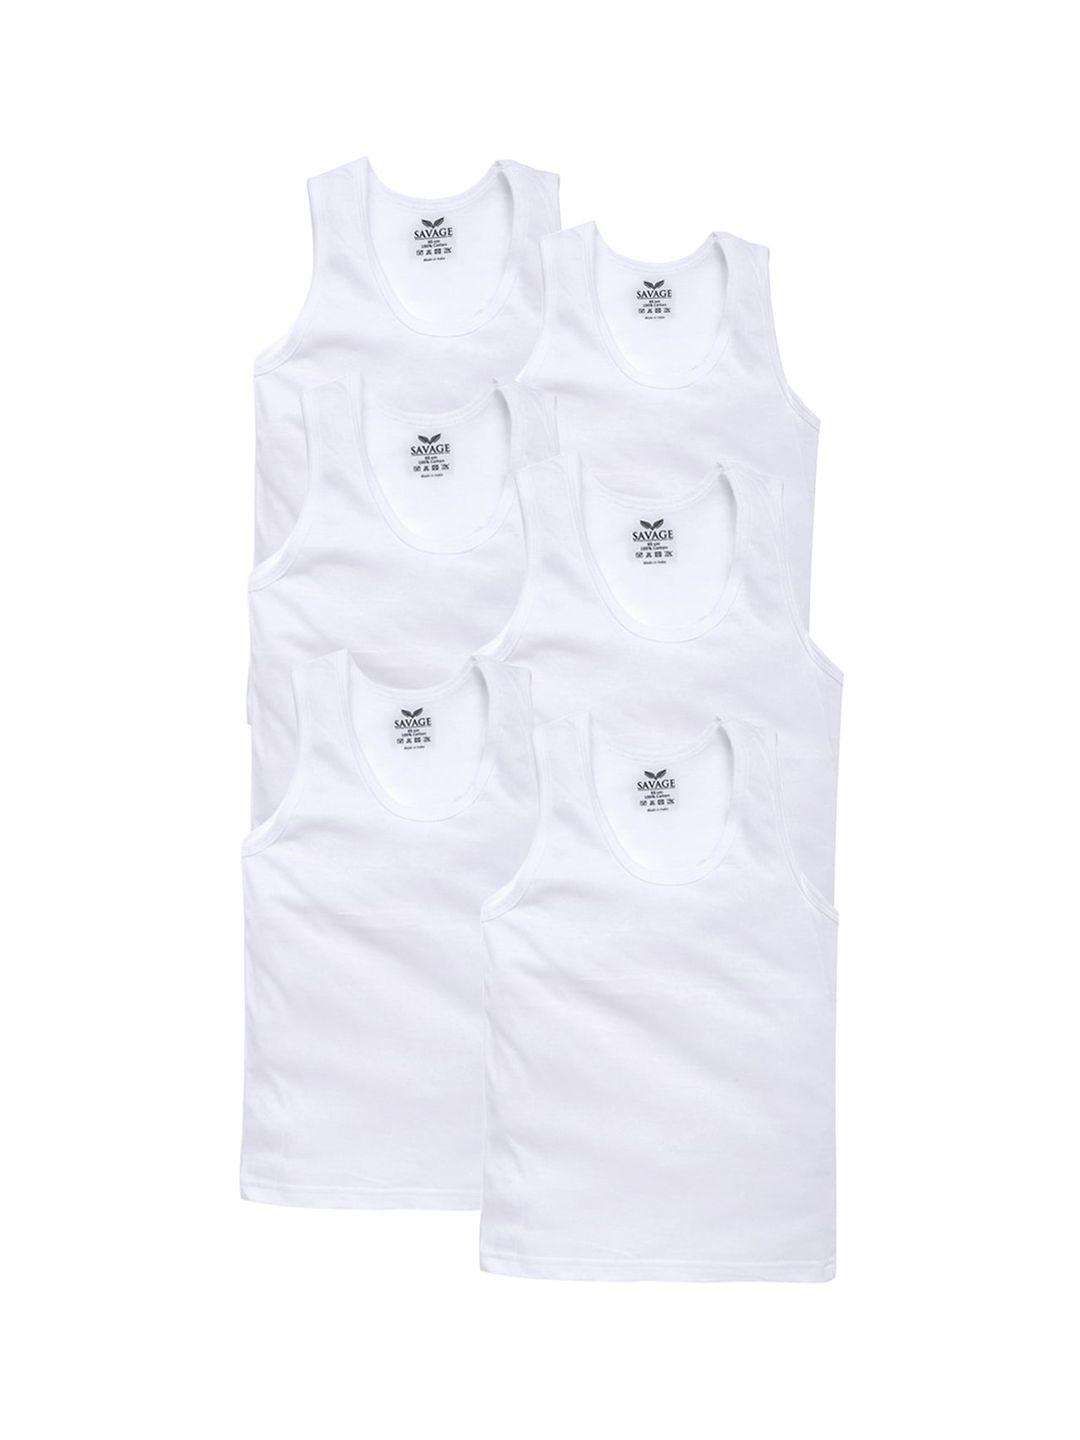 savage boys pack of 6 white solid cotton innerwear vests